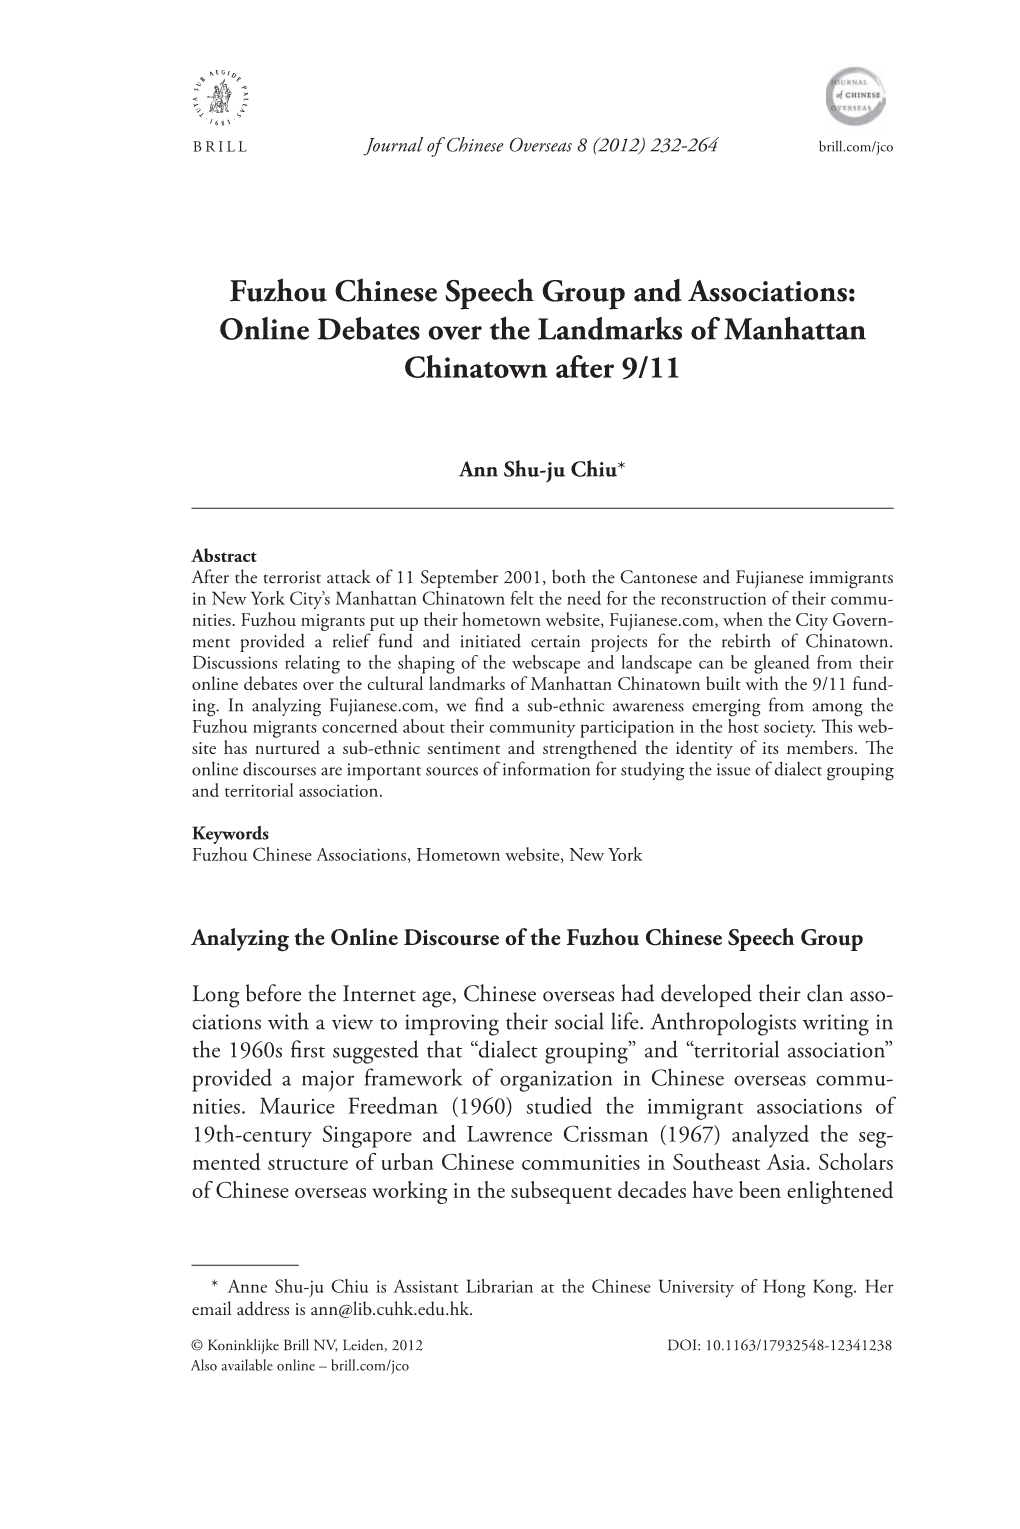 Fuzhou Chinese Speech Group and Associations: Online Debates Over the Landmarks of Manhattan Chinatown After 9/11